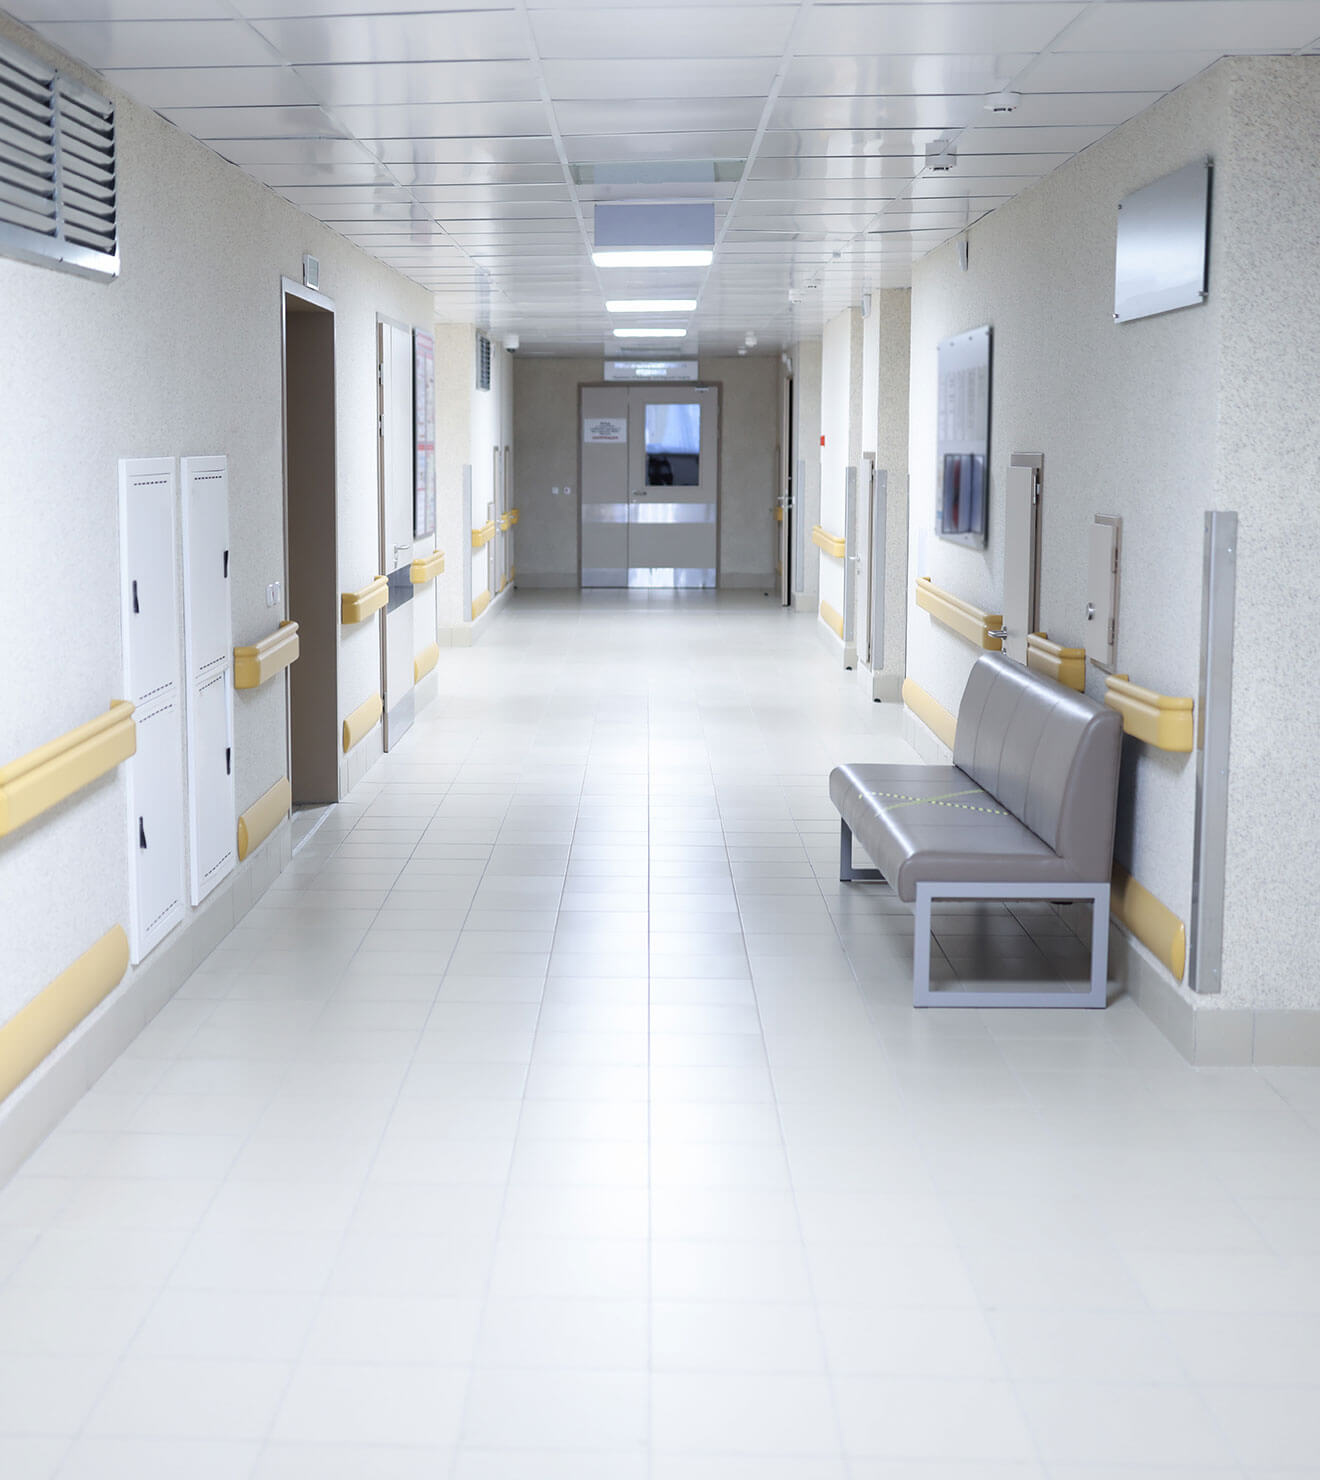 Hospital corridor and patient rooms with clean floors maintained with Powerit's floor cleaner